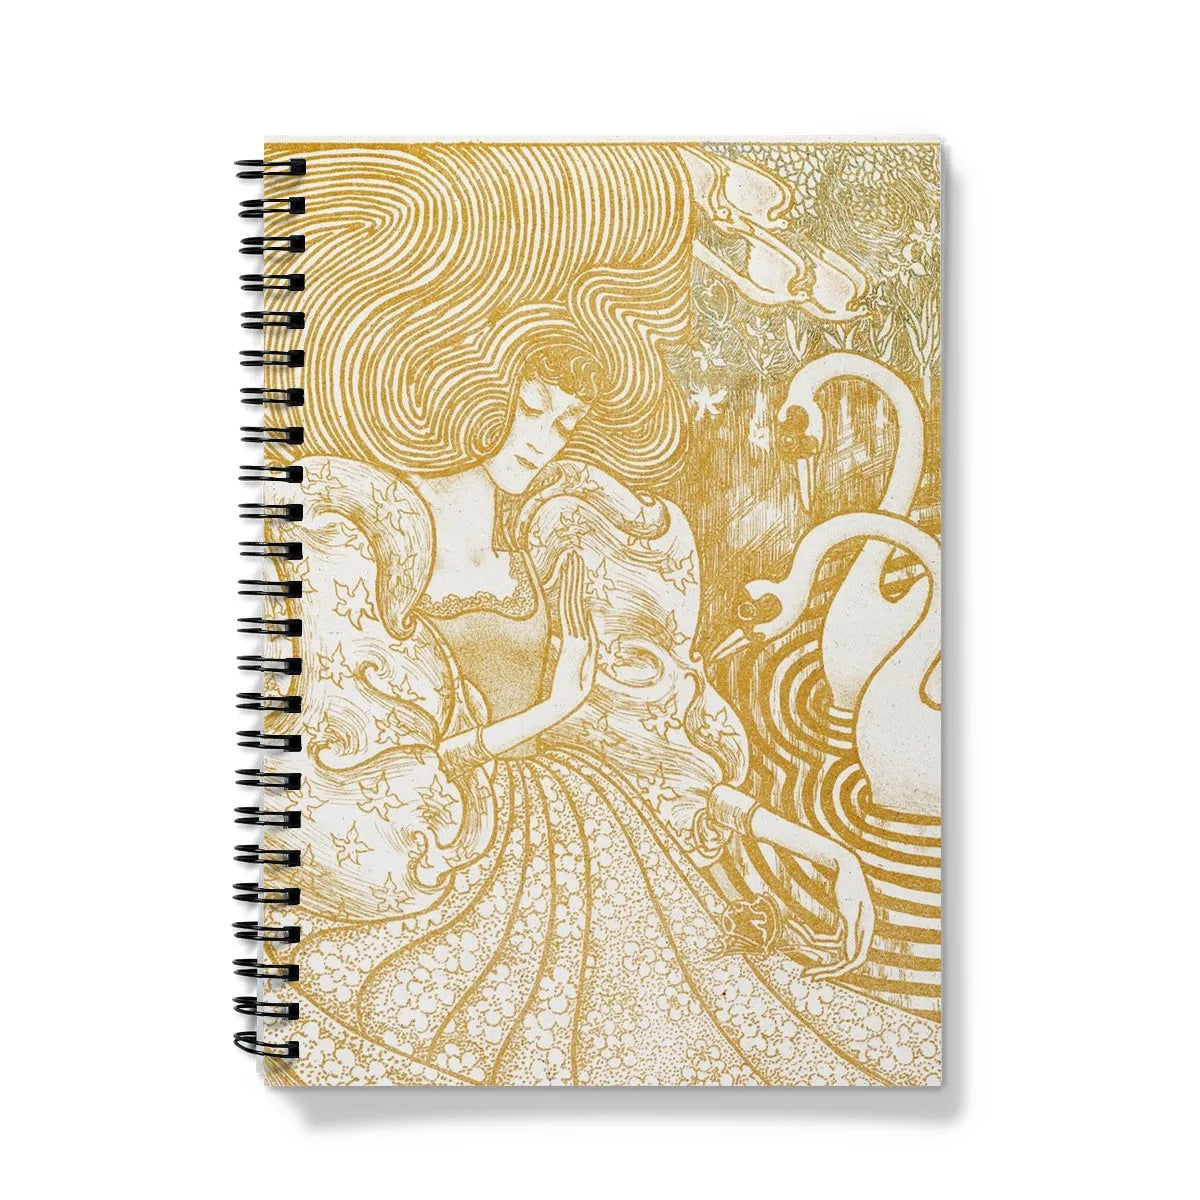 Woman With a Butterfly At a Pond With Two Swans By Jan Toorop Notebook - A5 / Graph - Notebooks & Notepads - Aesthetic